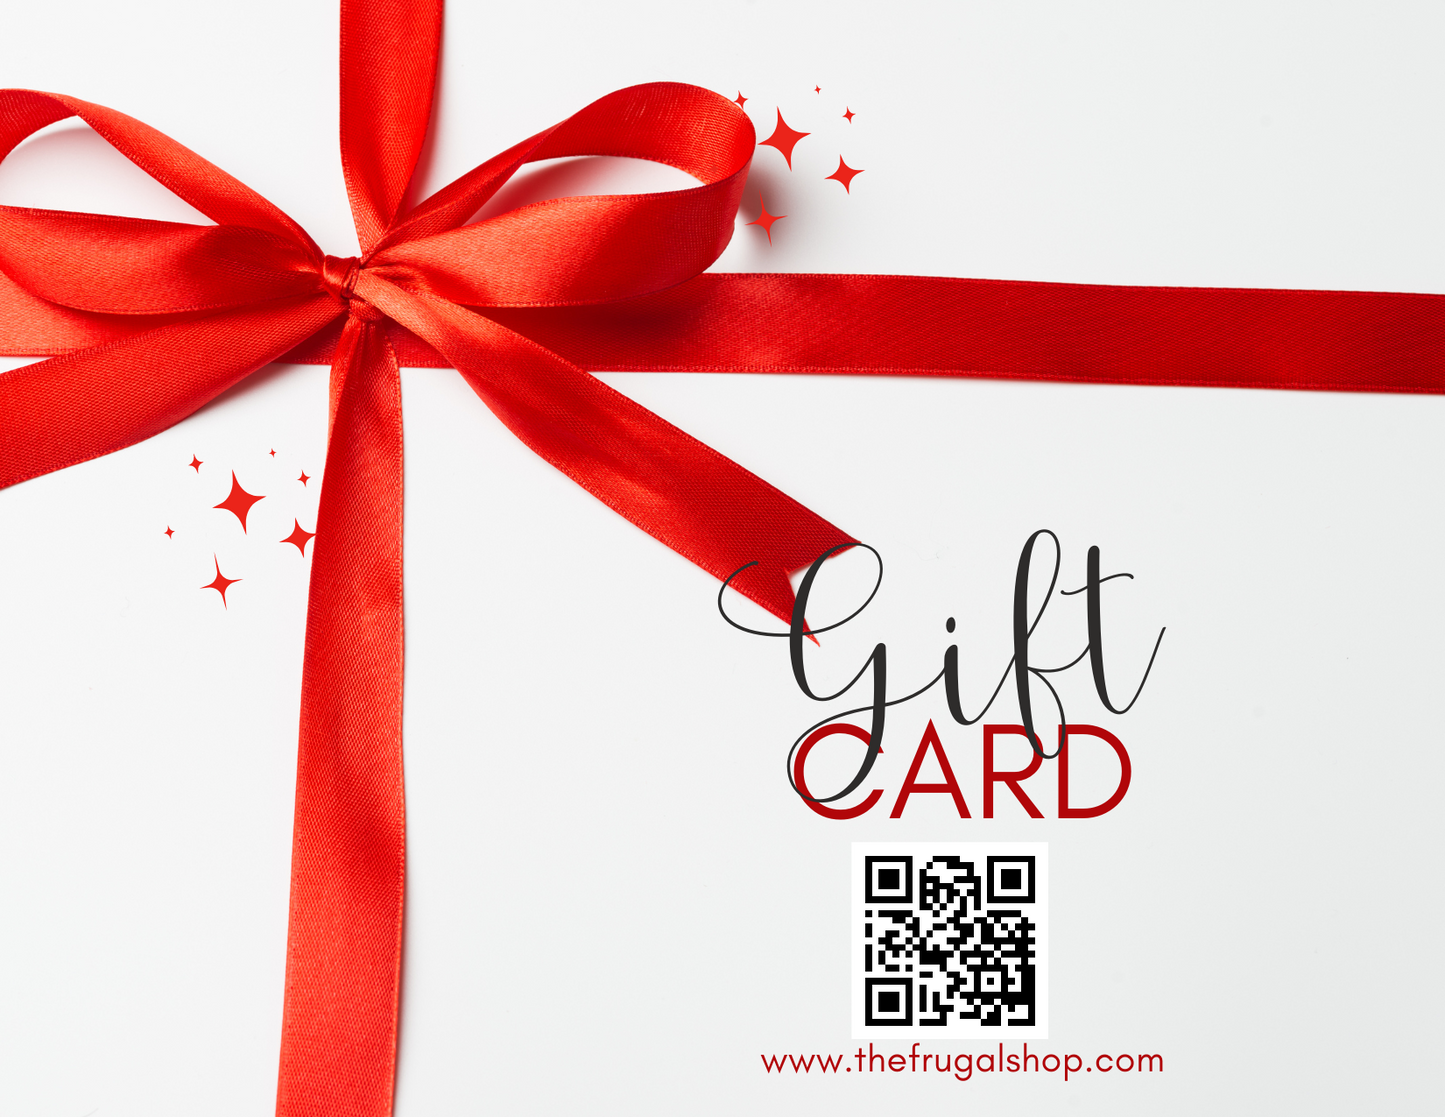 THE FRUGAL SHOP GIFT CARD